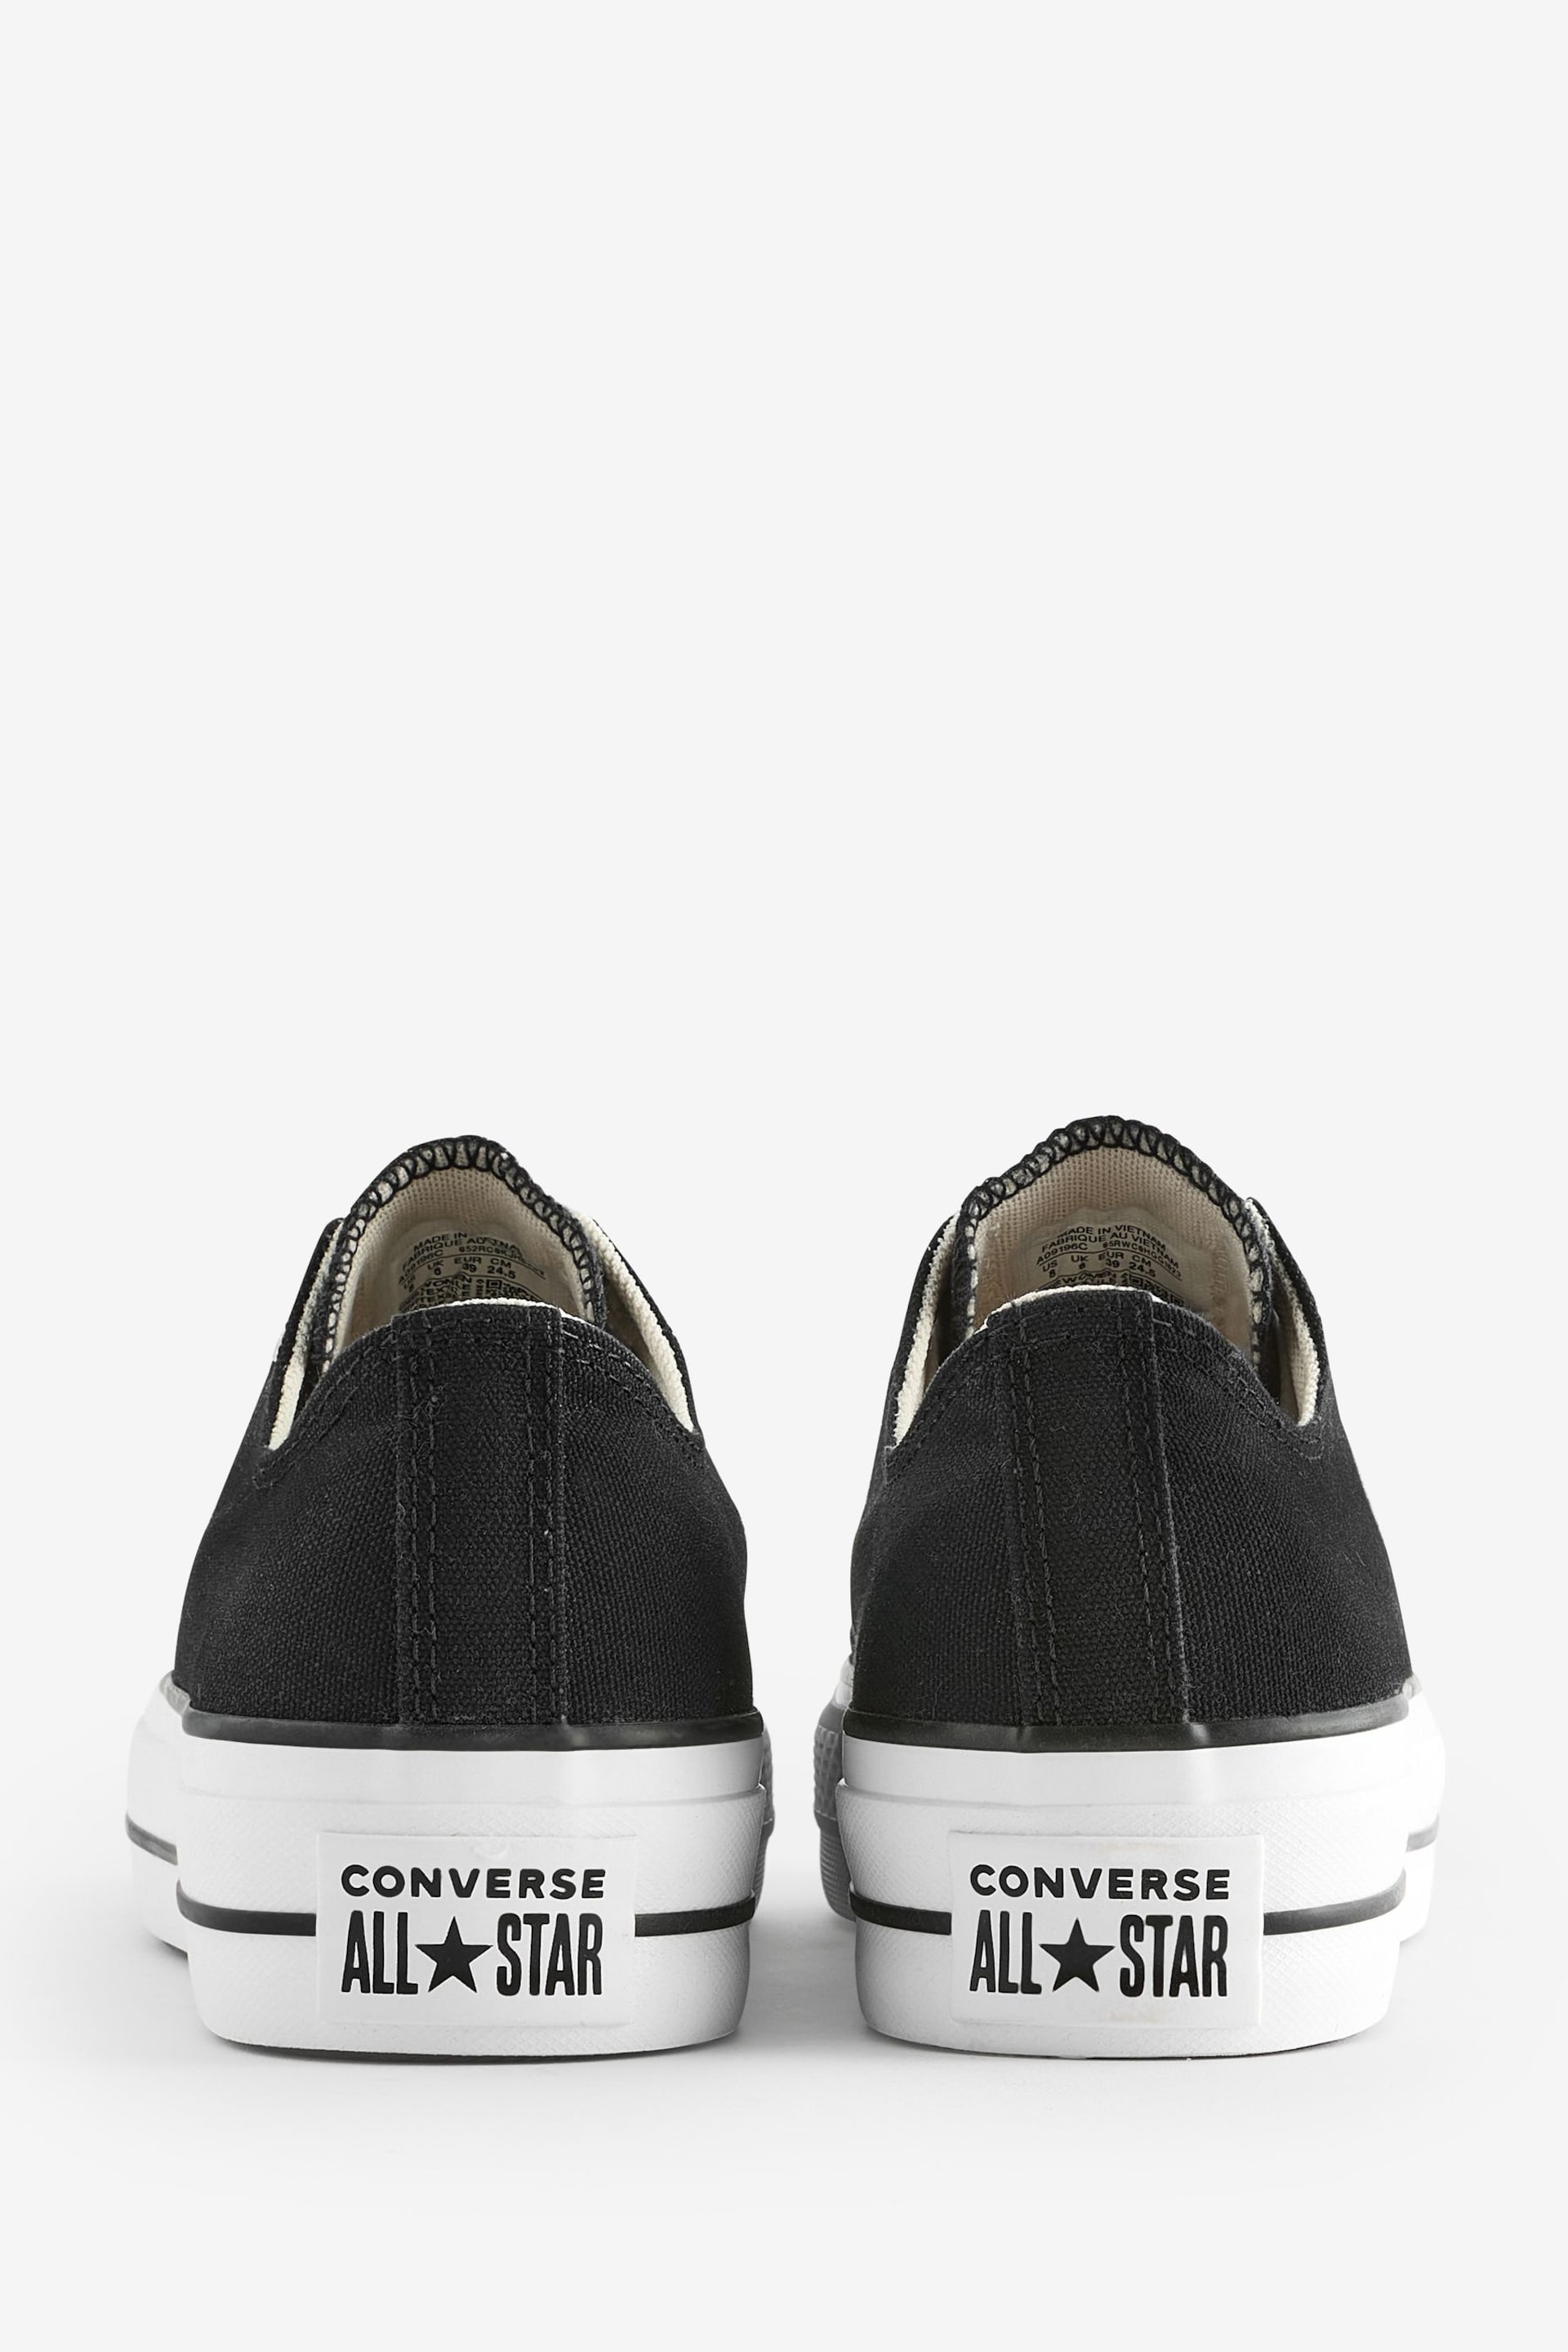 Converse Black Chuck Taylor All Star Lift Ox Trainers - Image 4 of 9